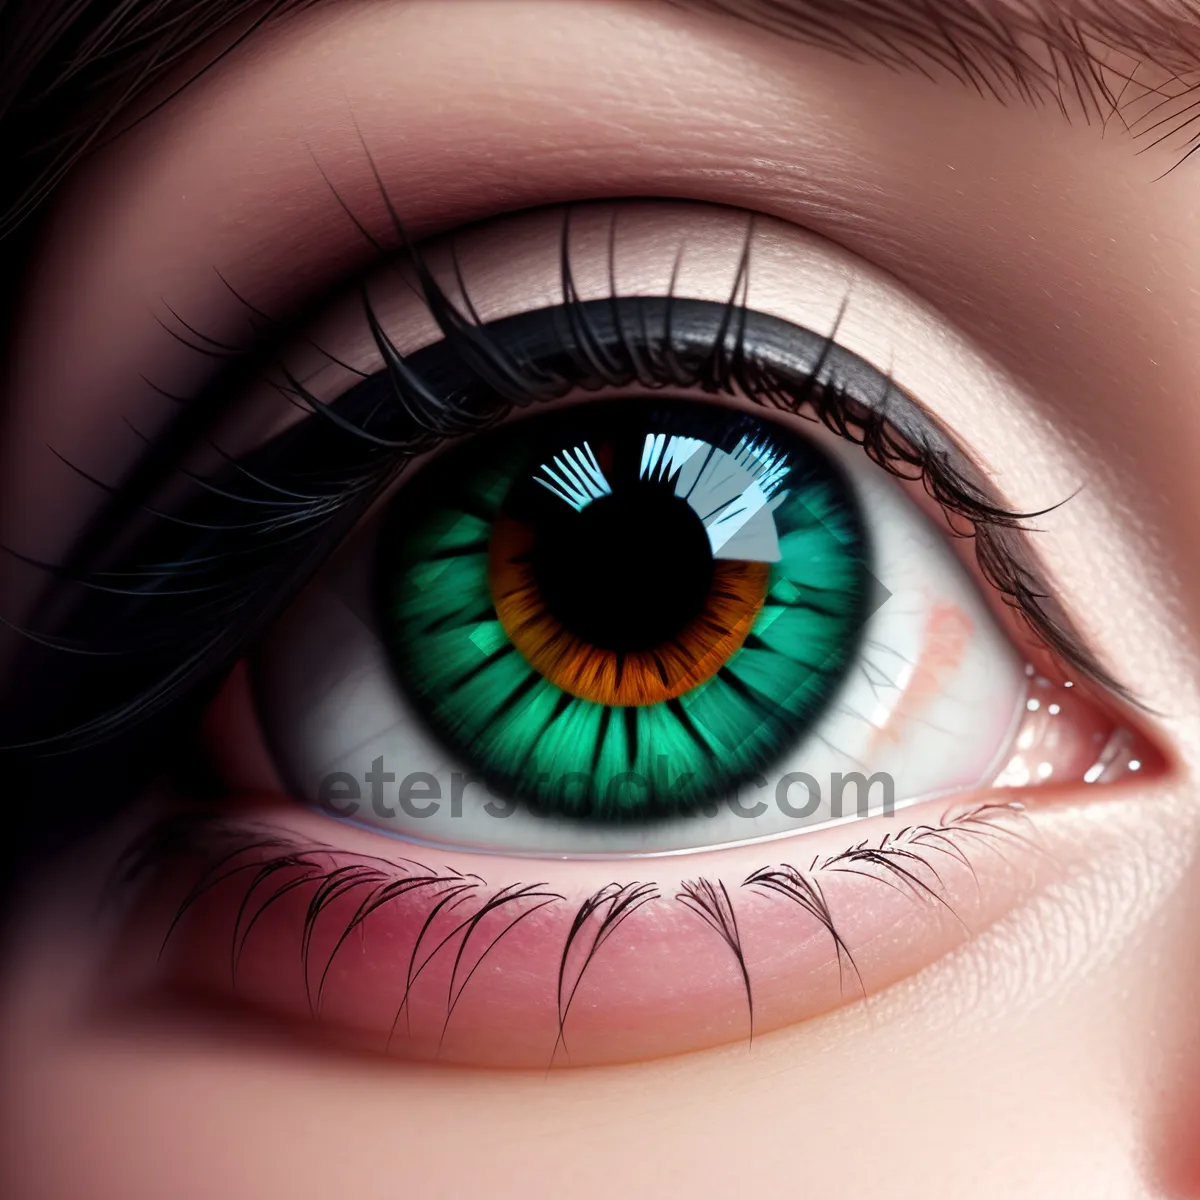 Picture of Brilliant Iris: Captivating Close-up of Human Eye